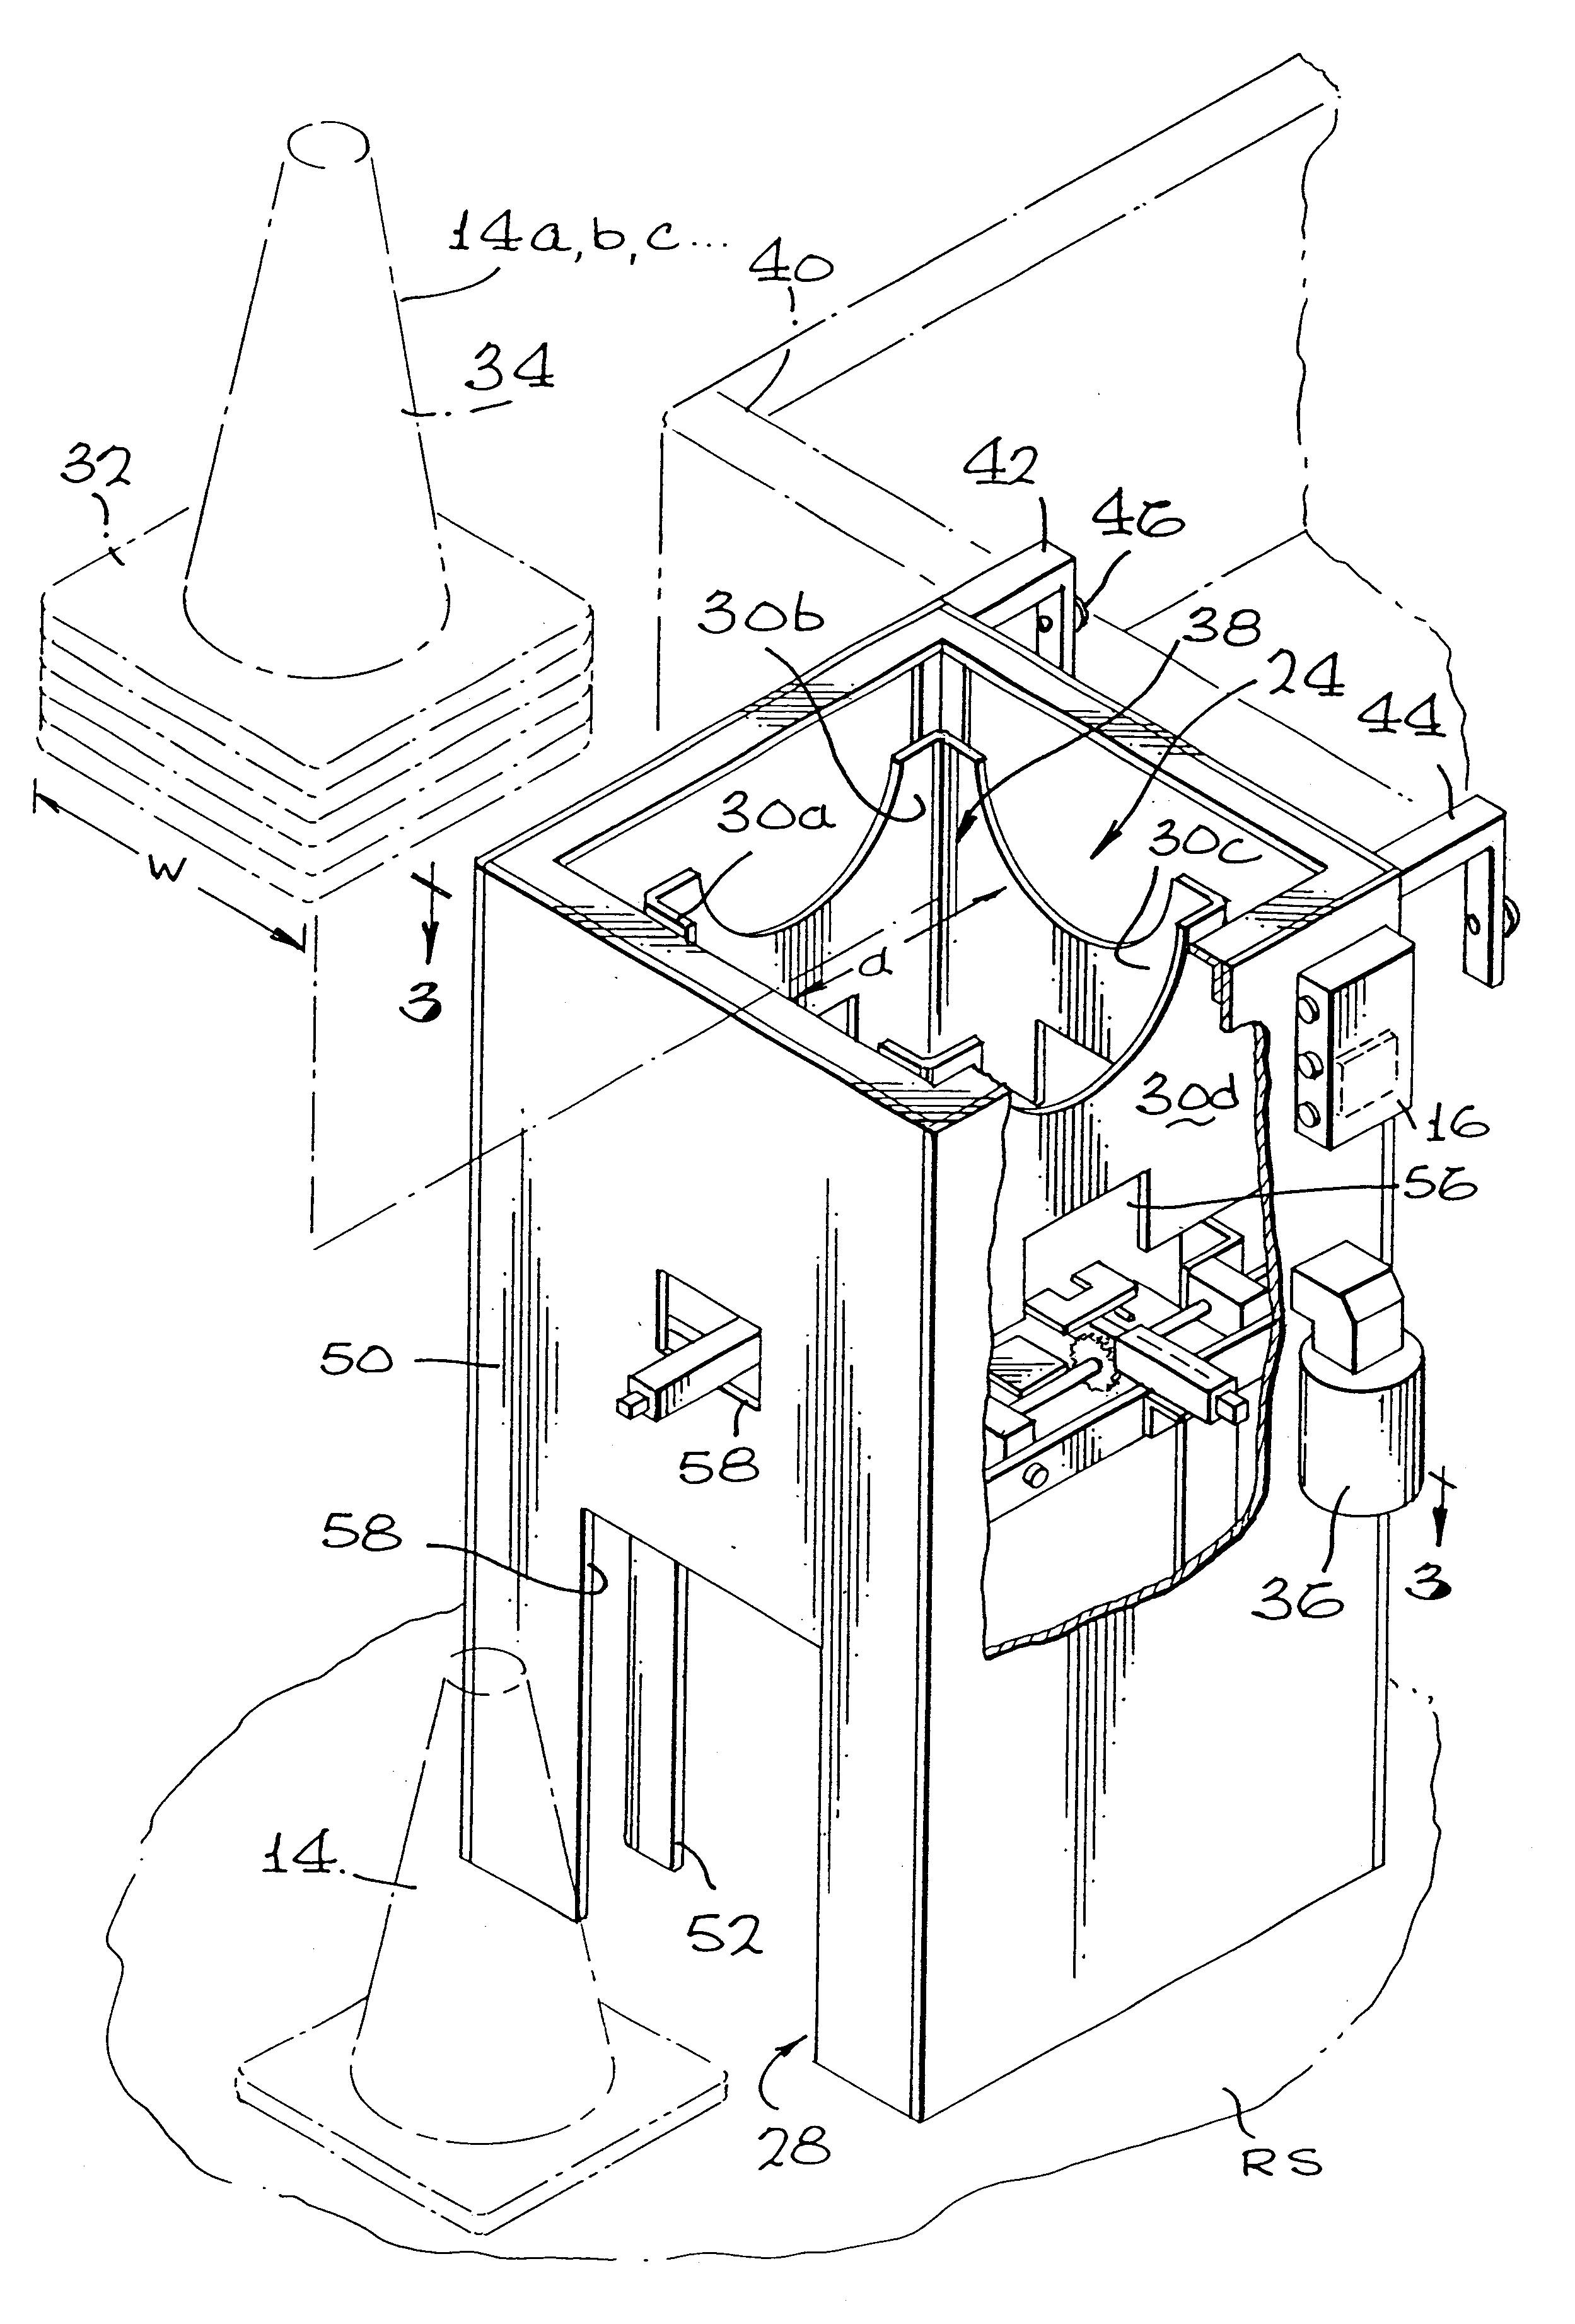 Device for placing cones on a roadway surface